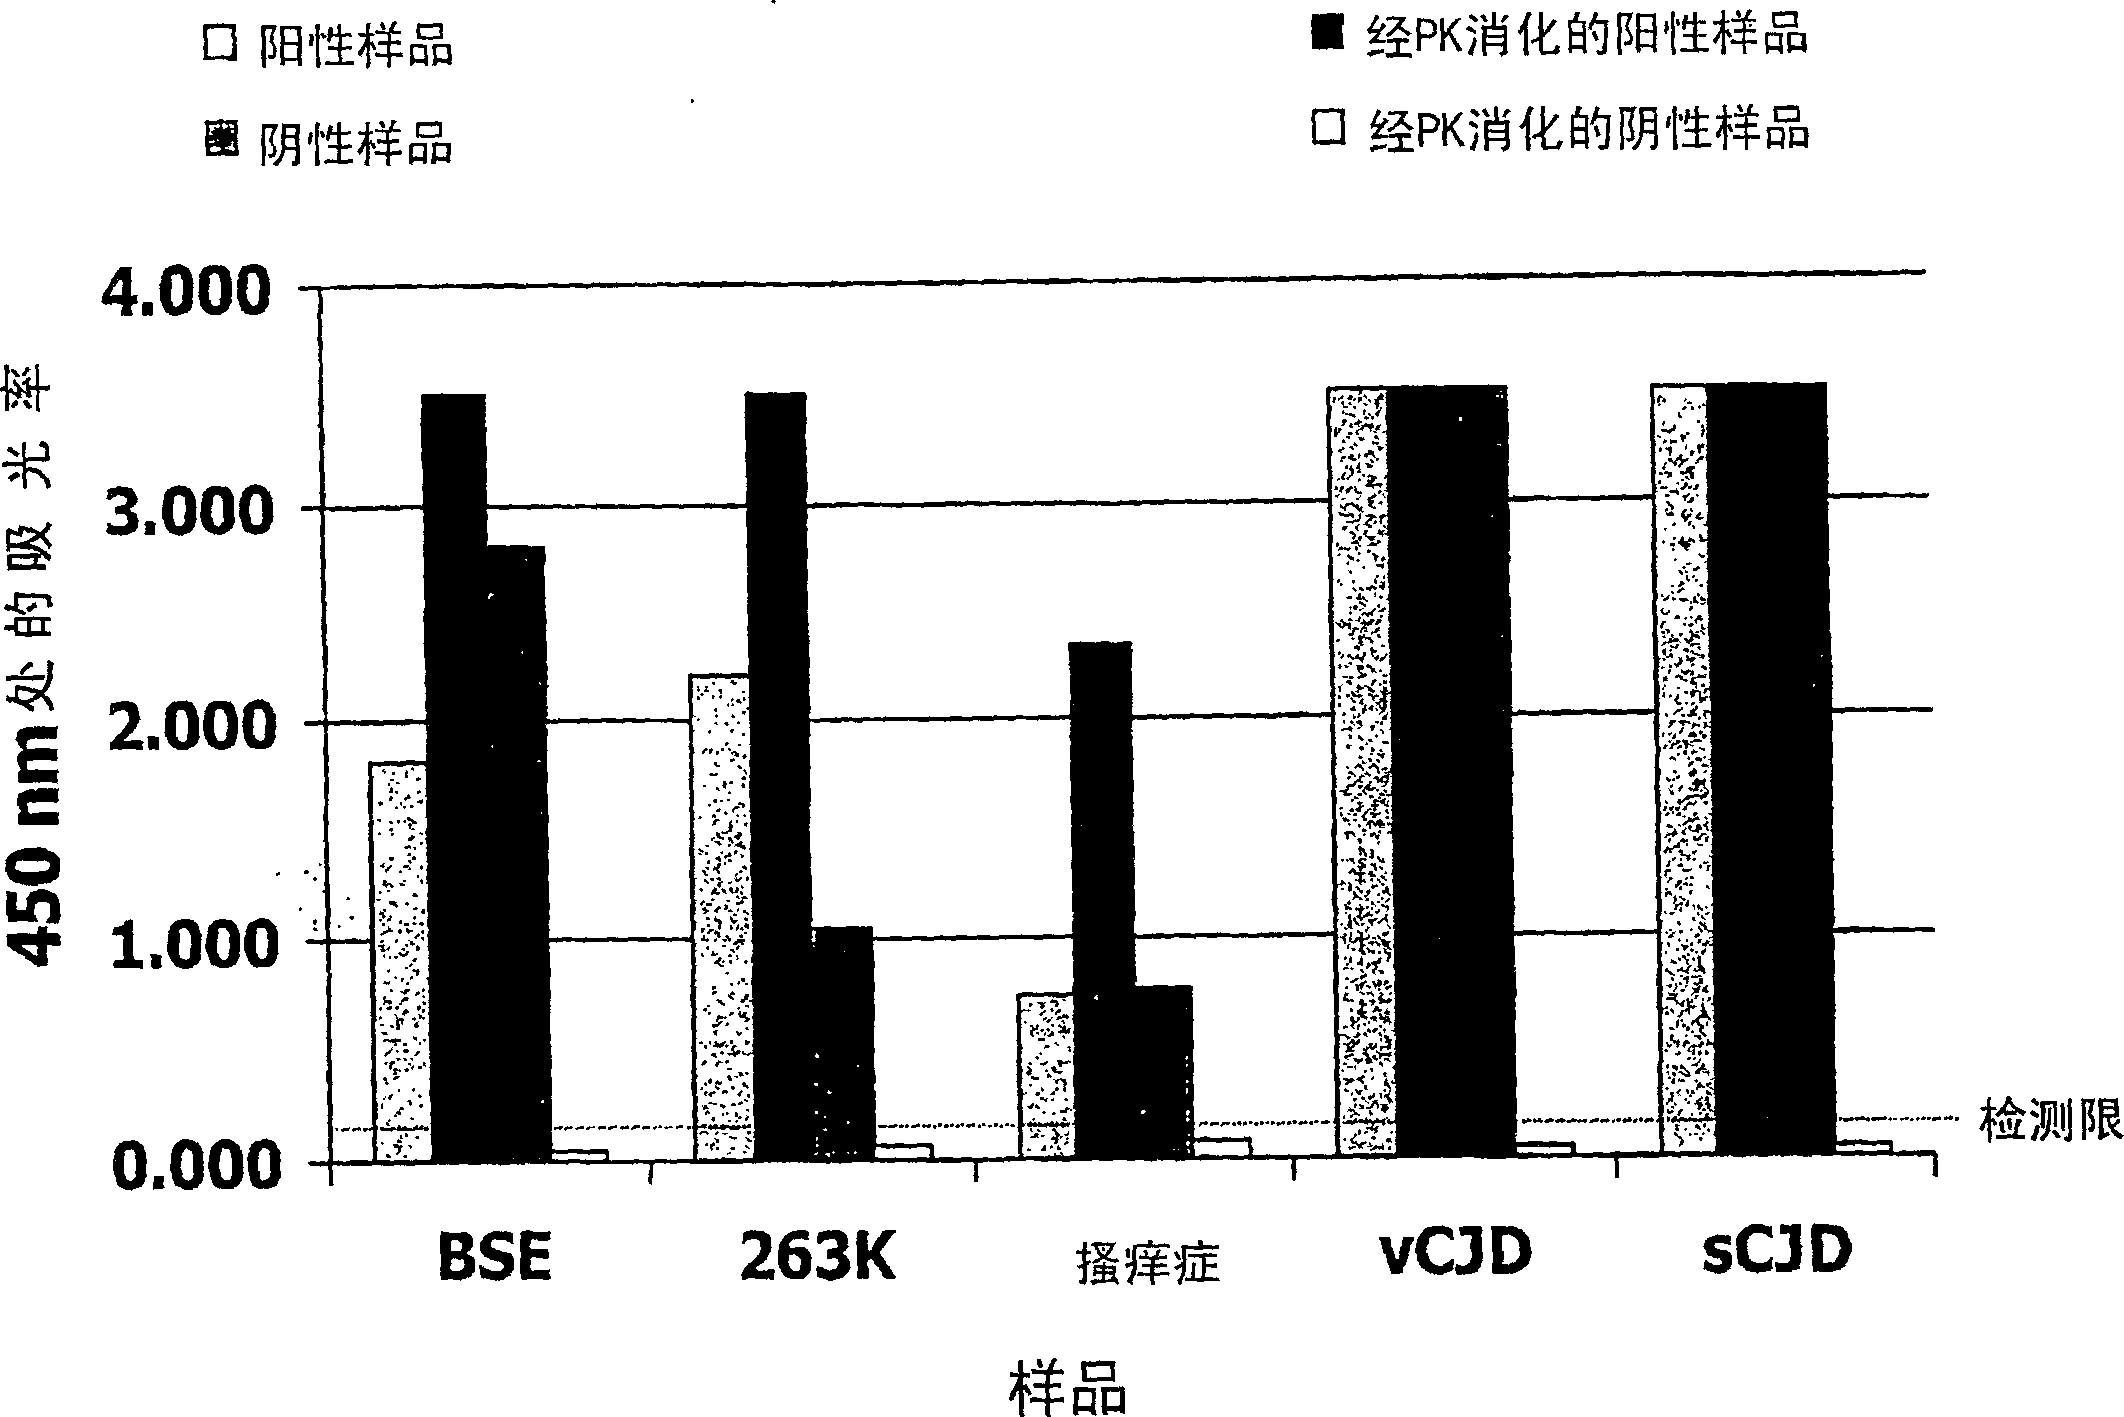 Method for the detection of a pathogenic form of a prion protein